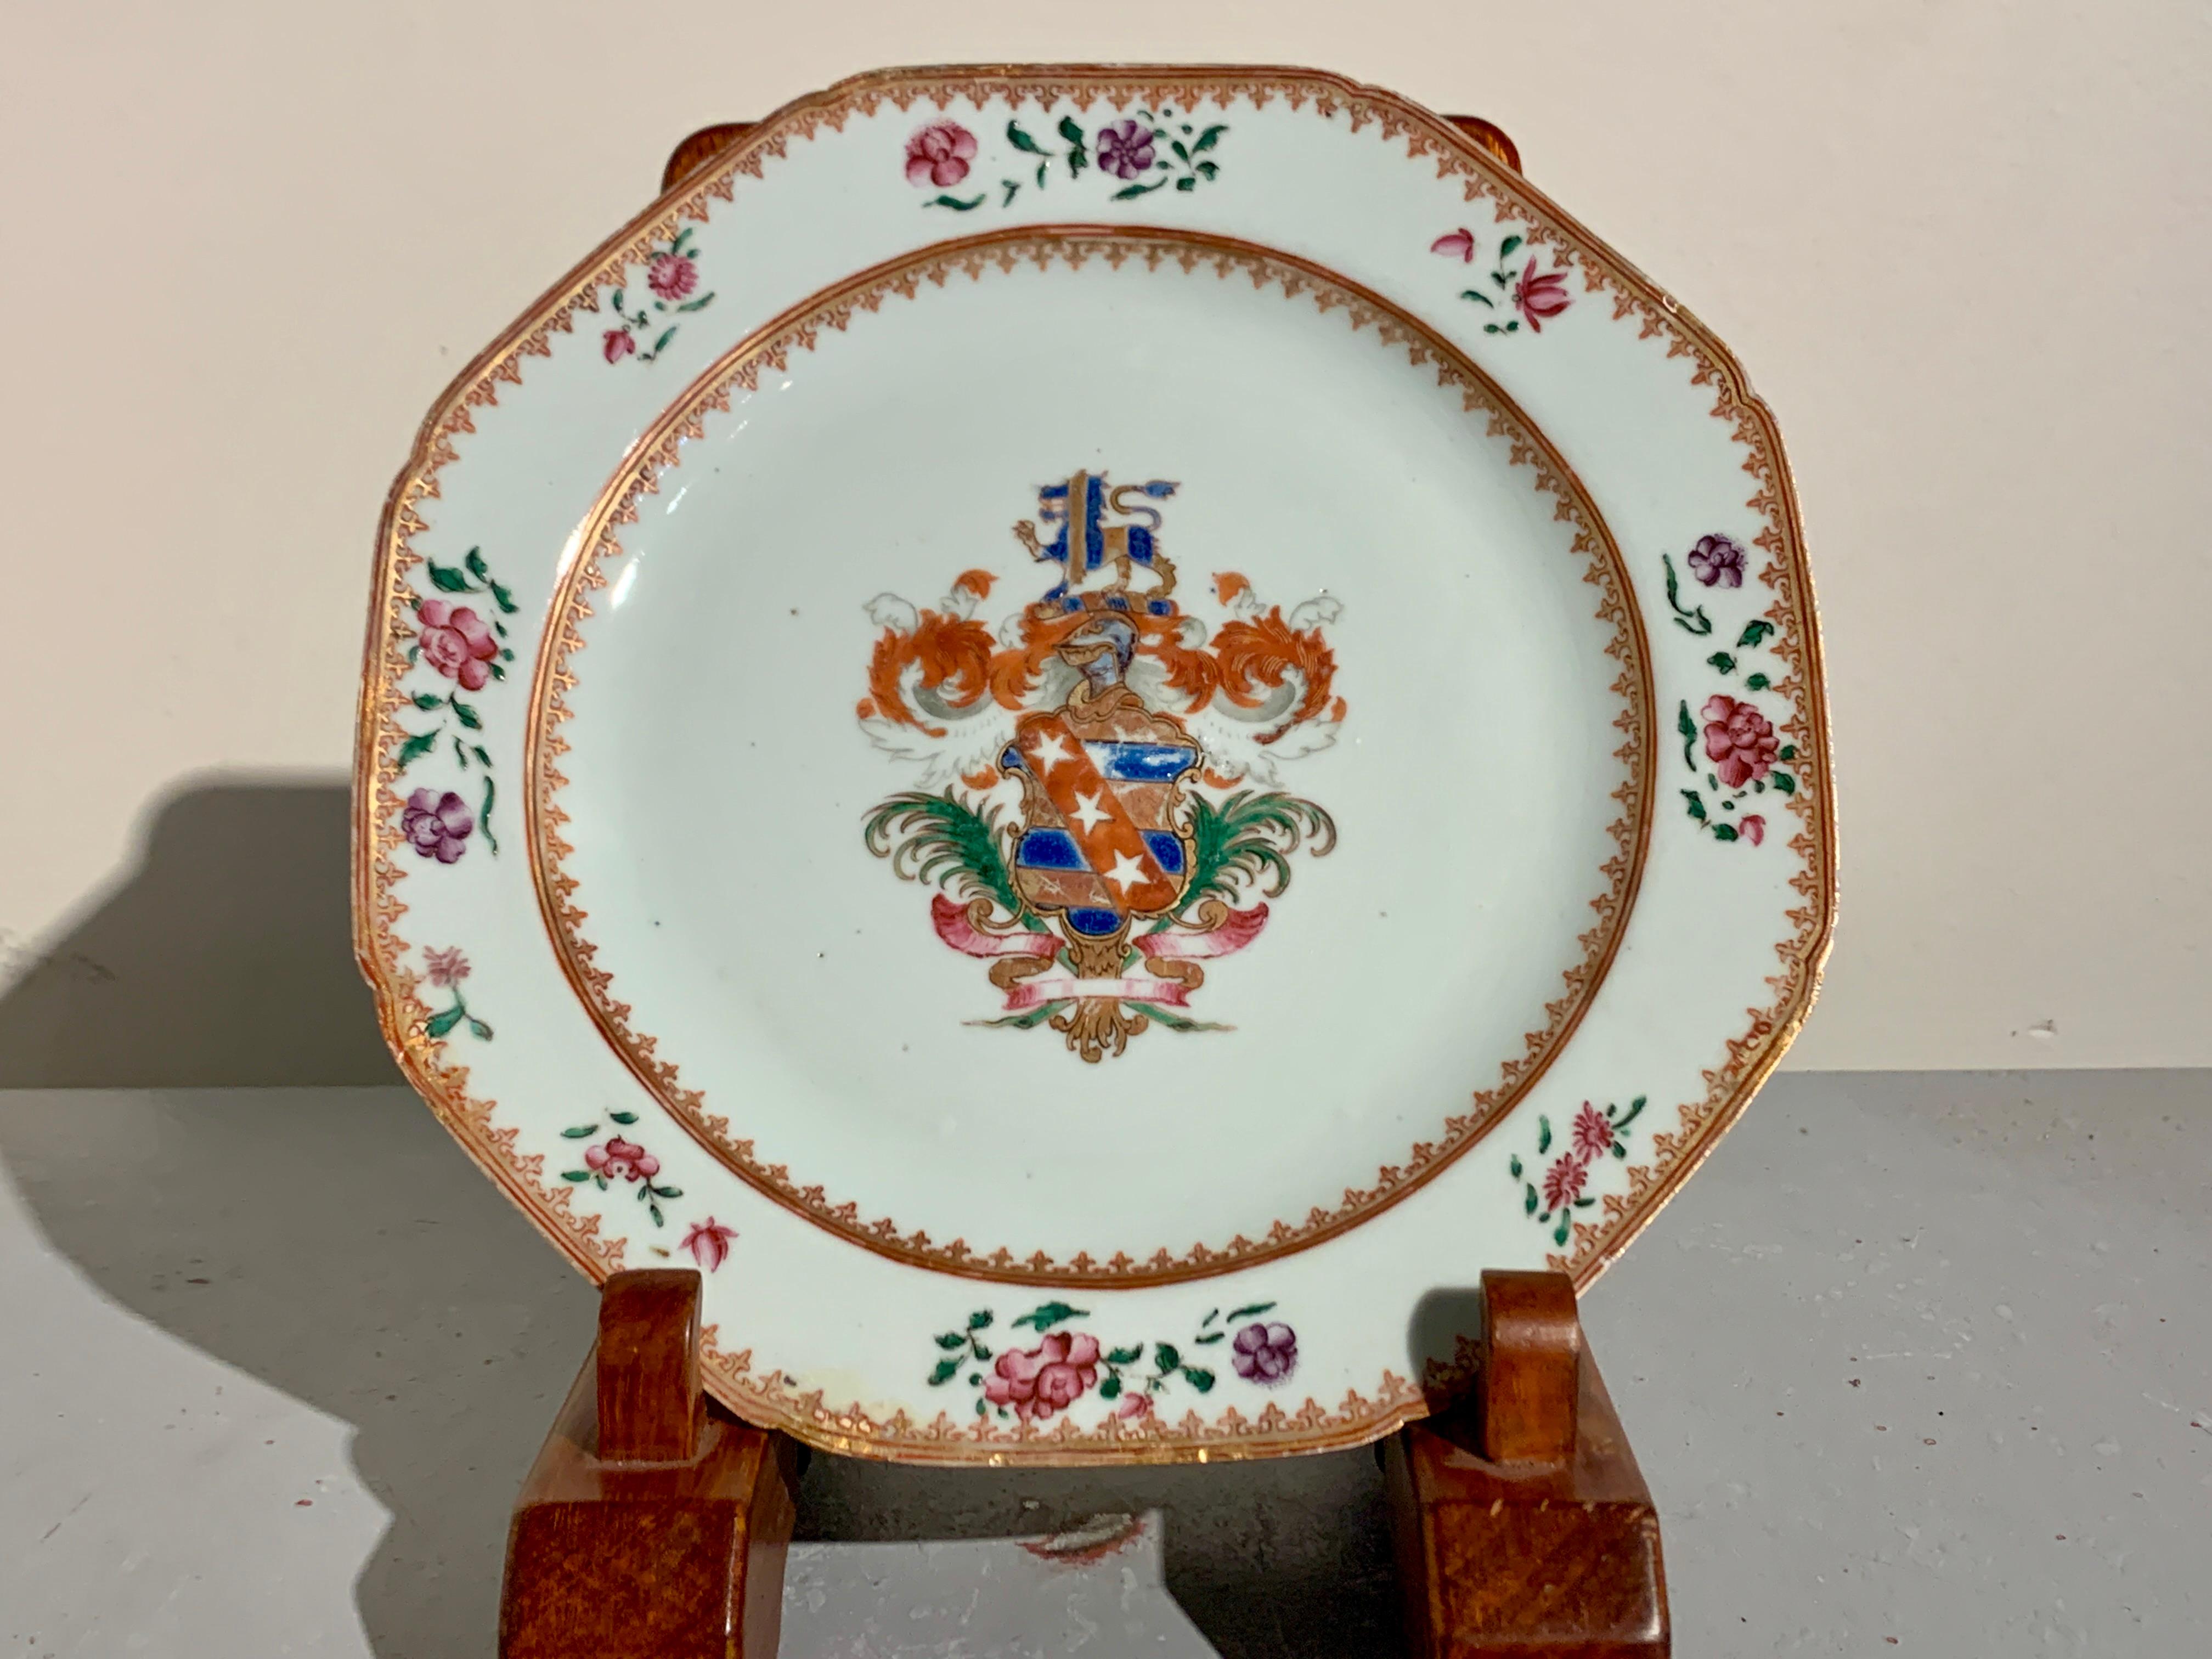 18th Century Pair Chinese Export Porcelain Permbridge Armorial Plates, mid 18th c, China For Sale